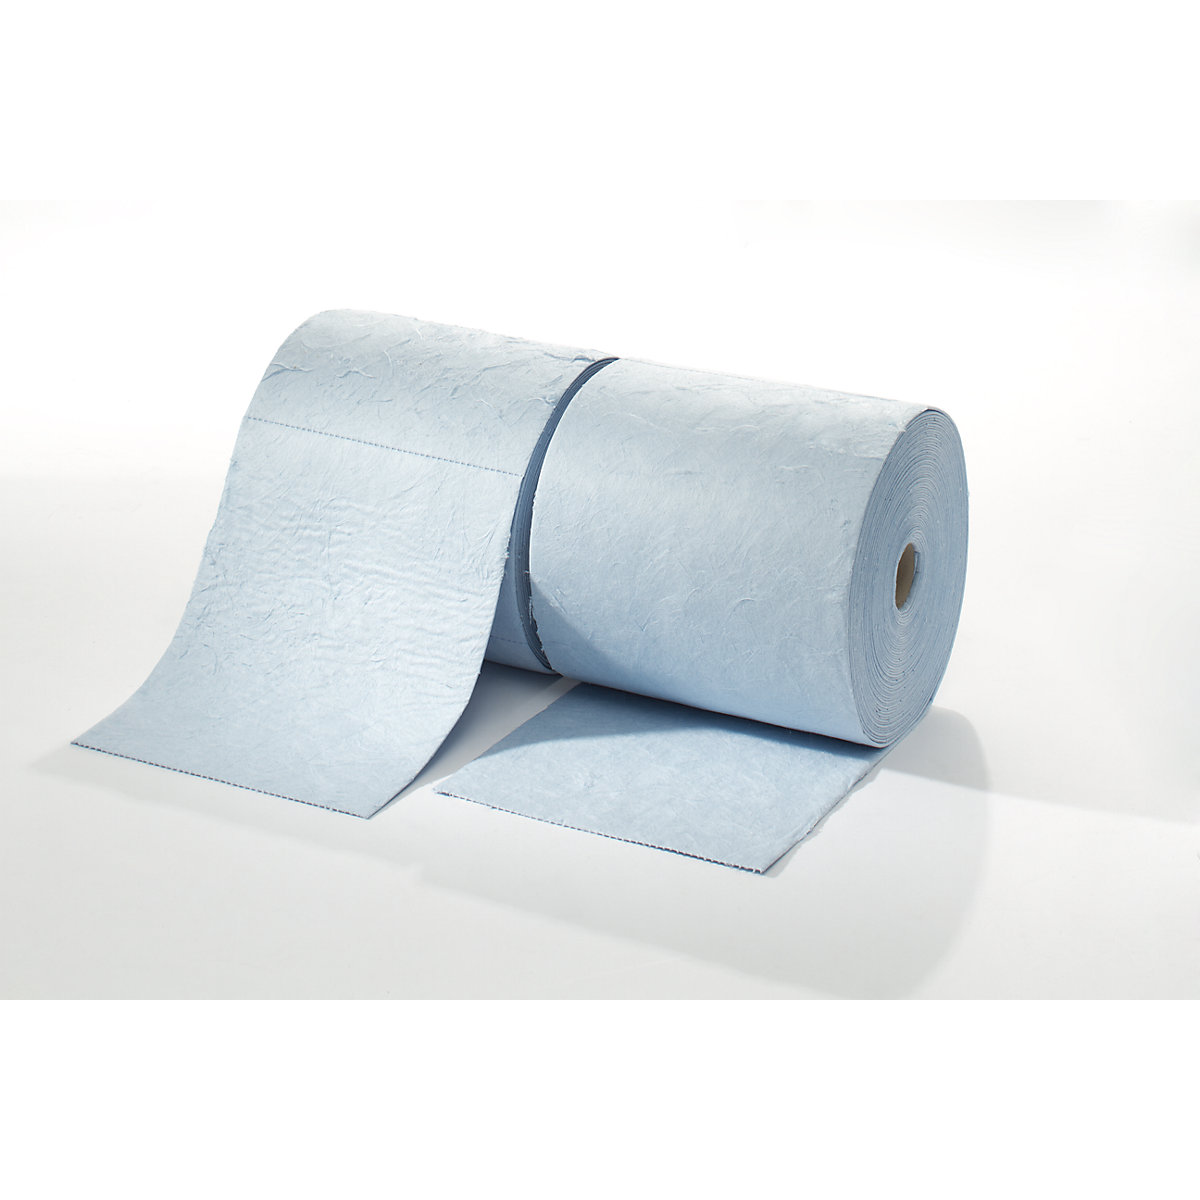 FIRST absorbent sheeting, roll of sheeting, heavy version, for oil, 400 mm x 40 m, blue, pack of 2 rolls-17